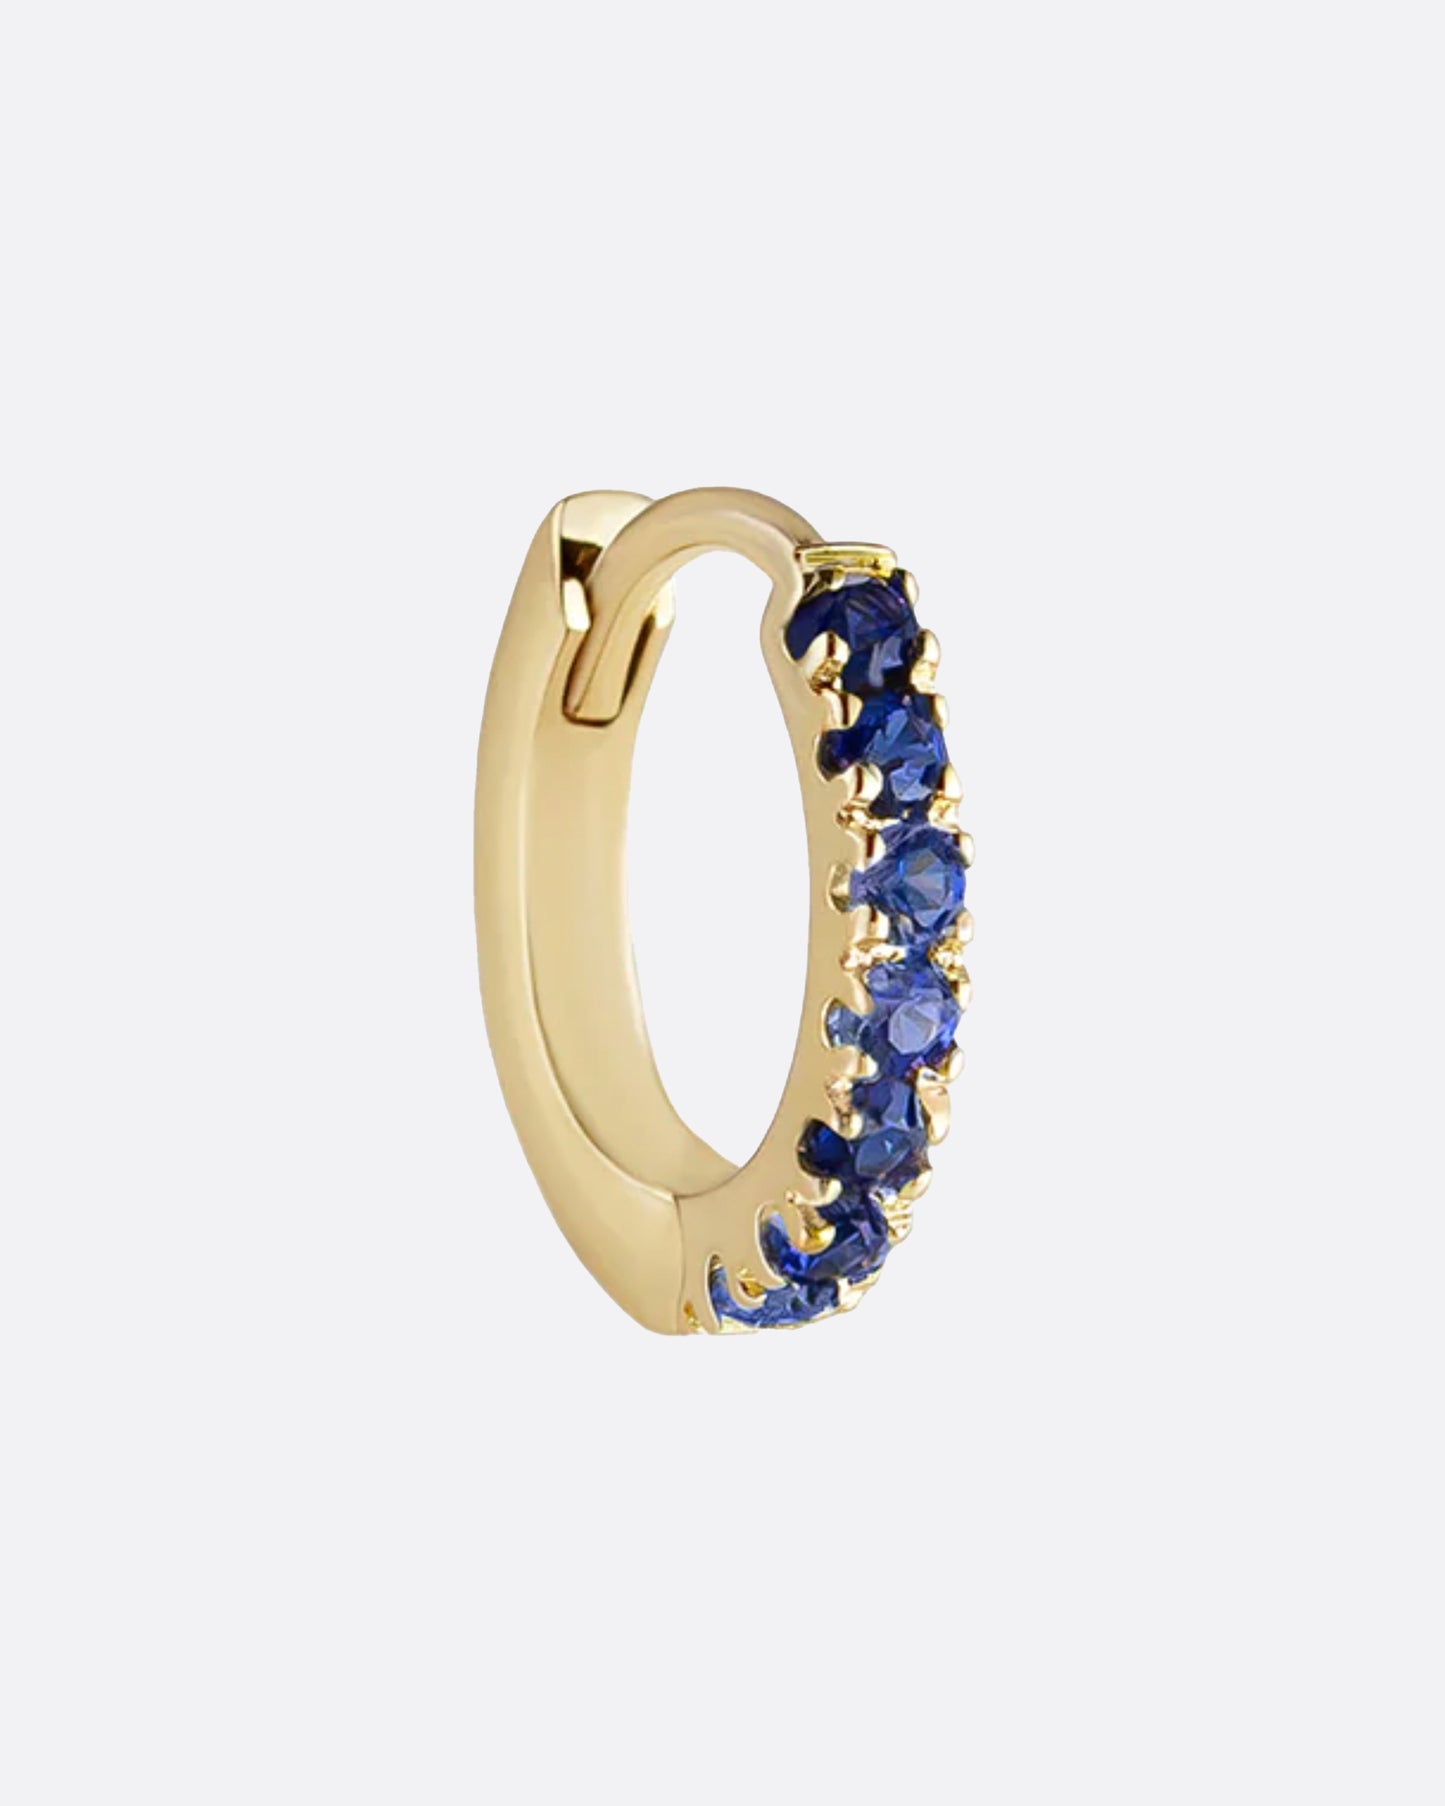 A small, hinged hoop lined with deep blue sapphires.